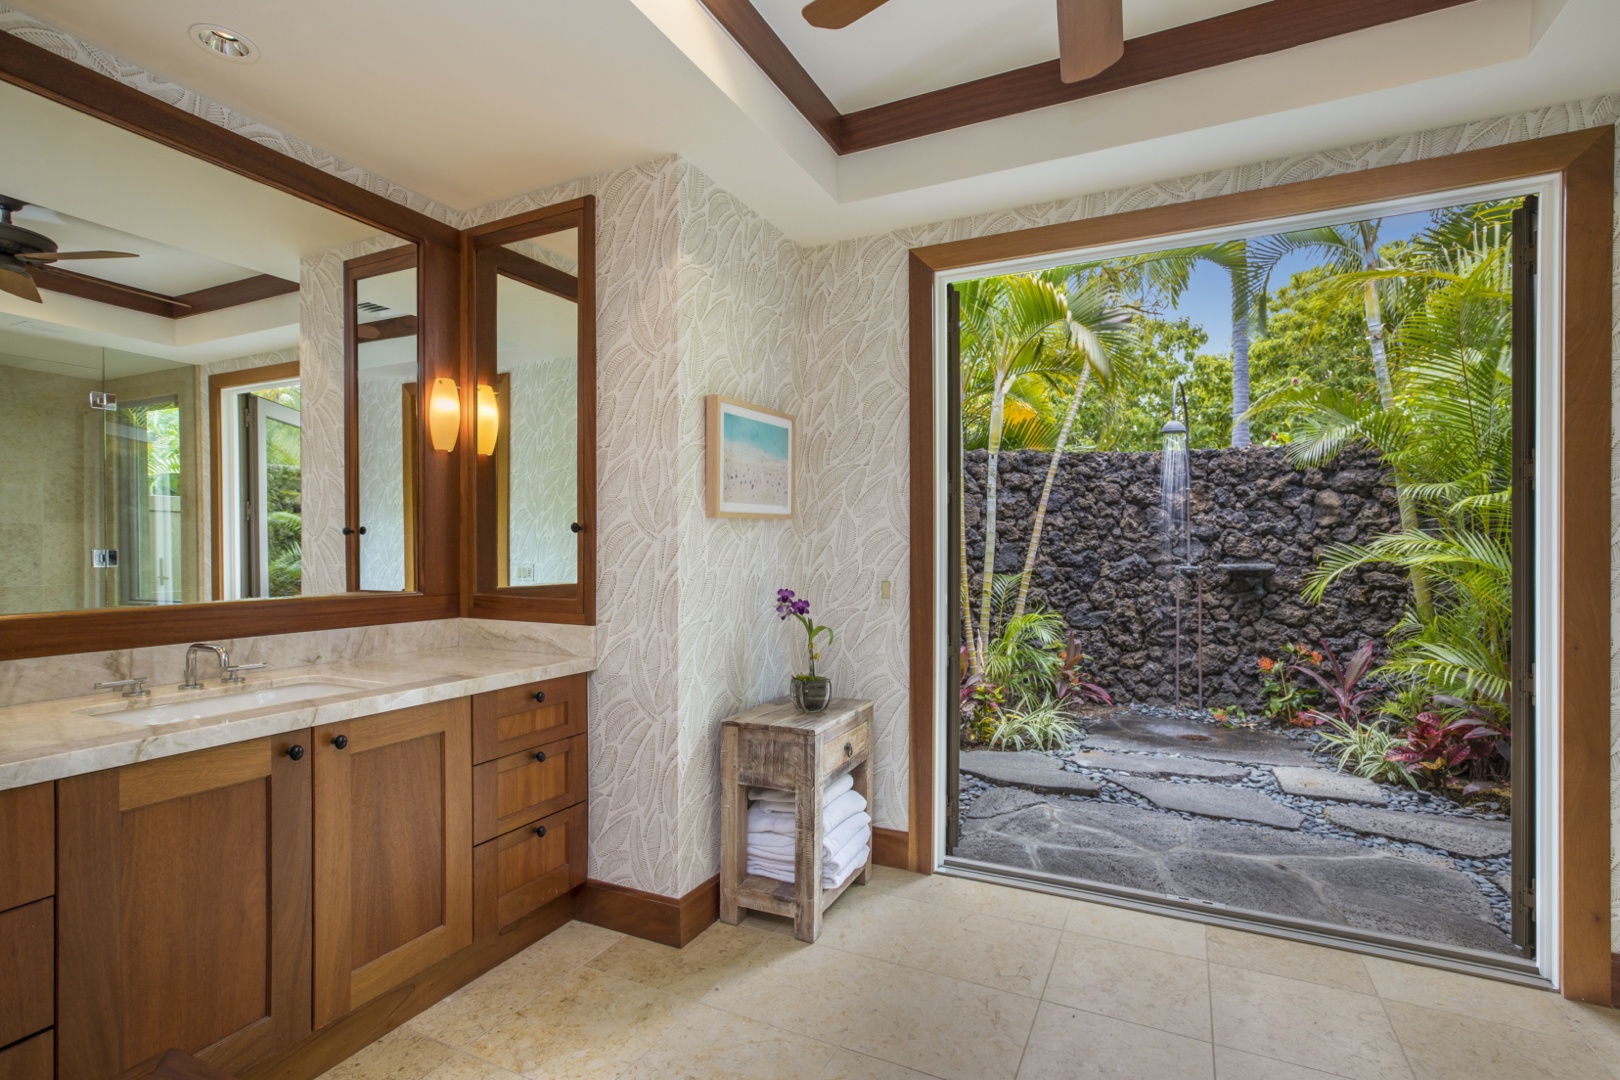 Kailua Kona Vacation Rentals, 4BD Kahikole Street (218) Estate Home at Four Seasons Resort at Hualalai - The generous en suite bath opens to the outdoor garden shower